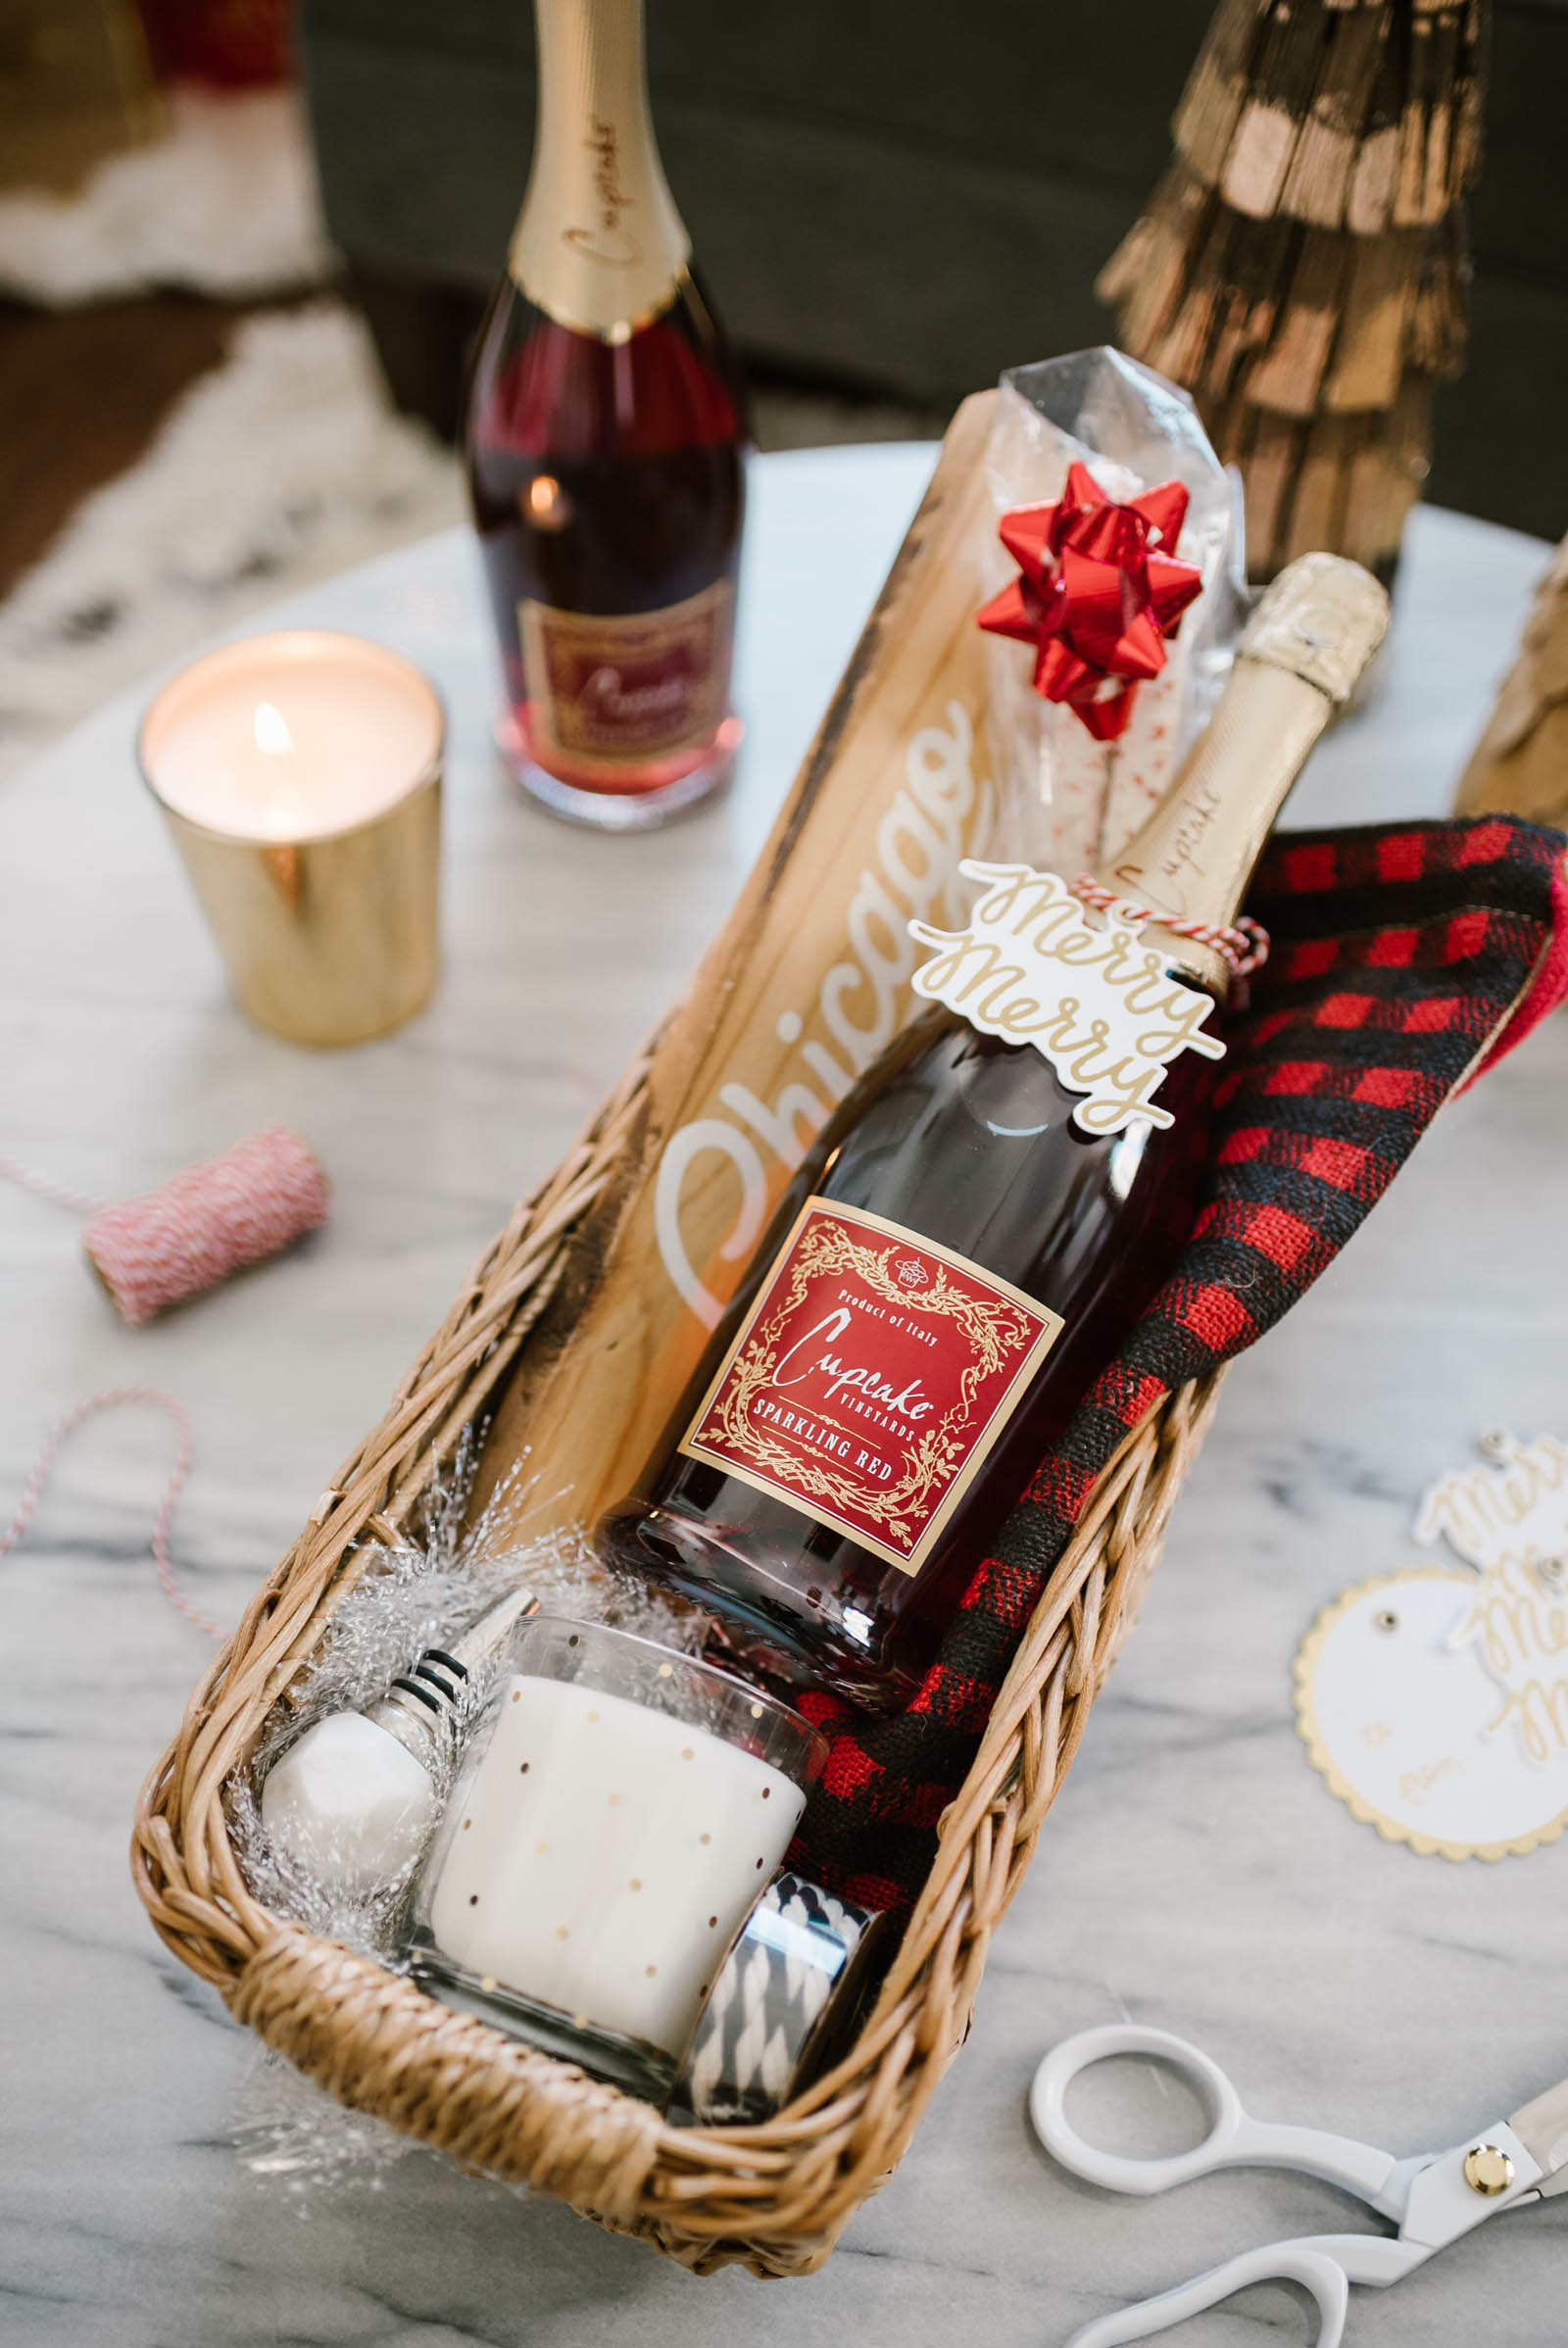 DIY Wine Gift Baskets Ideas
 Last Minute Holiday Idea Easy Homemade Gift Baskets